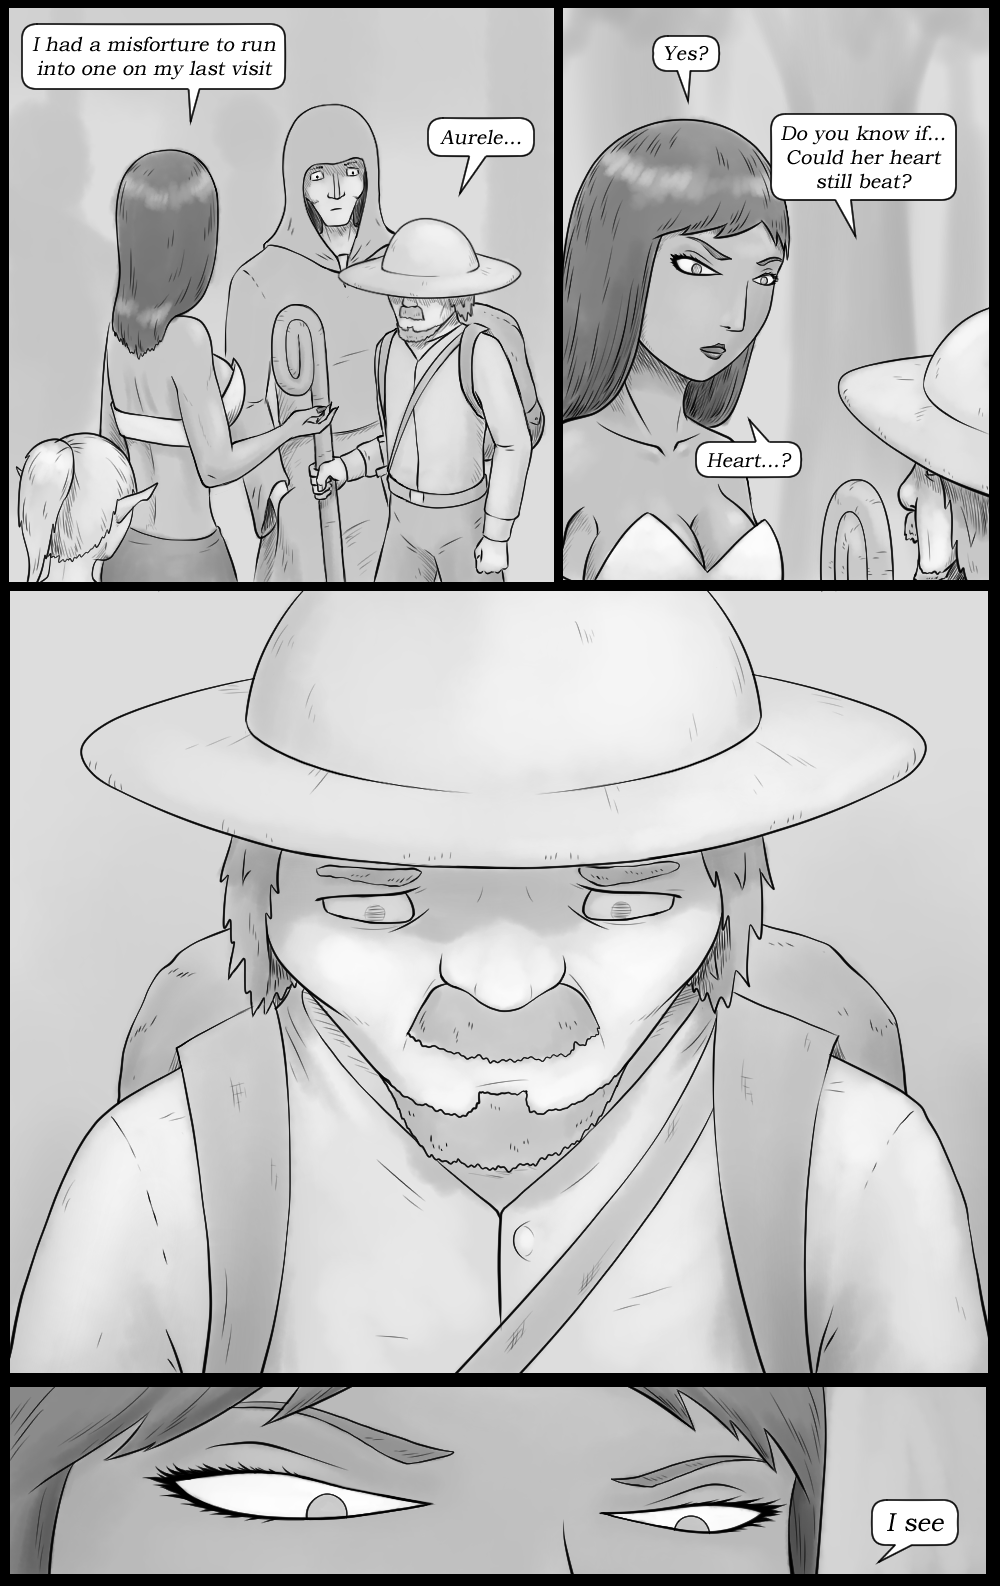 Page 35 - The heart question